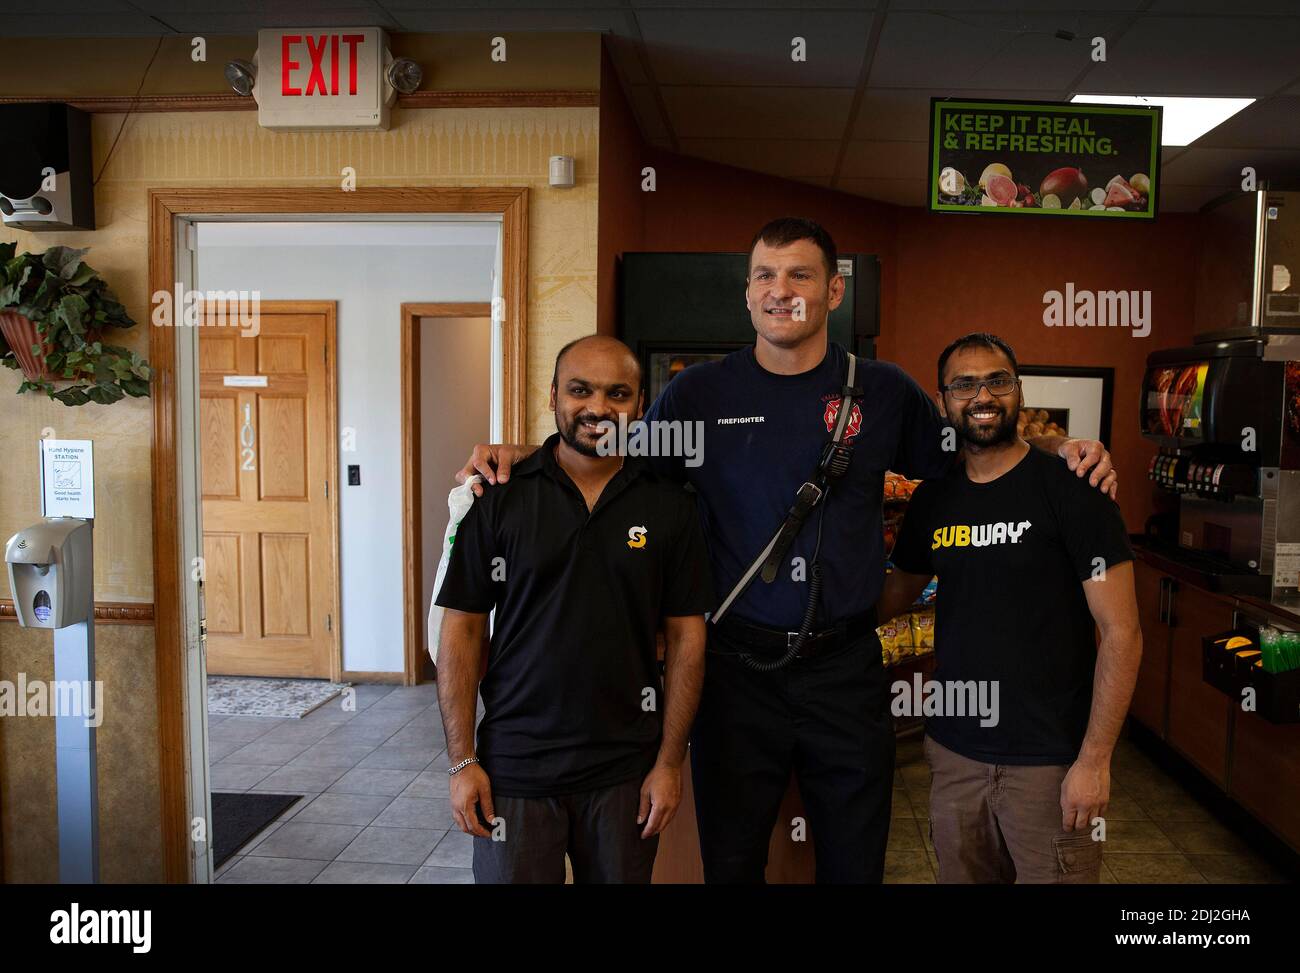 July 21, 2019: Former MMA heavyweight champ Stipe Miocic has been a part time Valley View, Ohio firefighter since 2010. Stipe has his picture taken with two subway workers and fans during his lunch break. Photo by Michael F McElroy Credit: Michael McElroy/ZUMA Wire/Alamy Live News Stock Photo